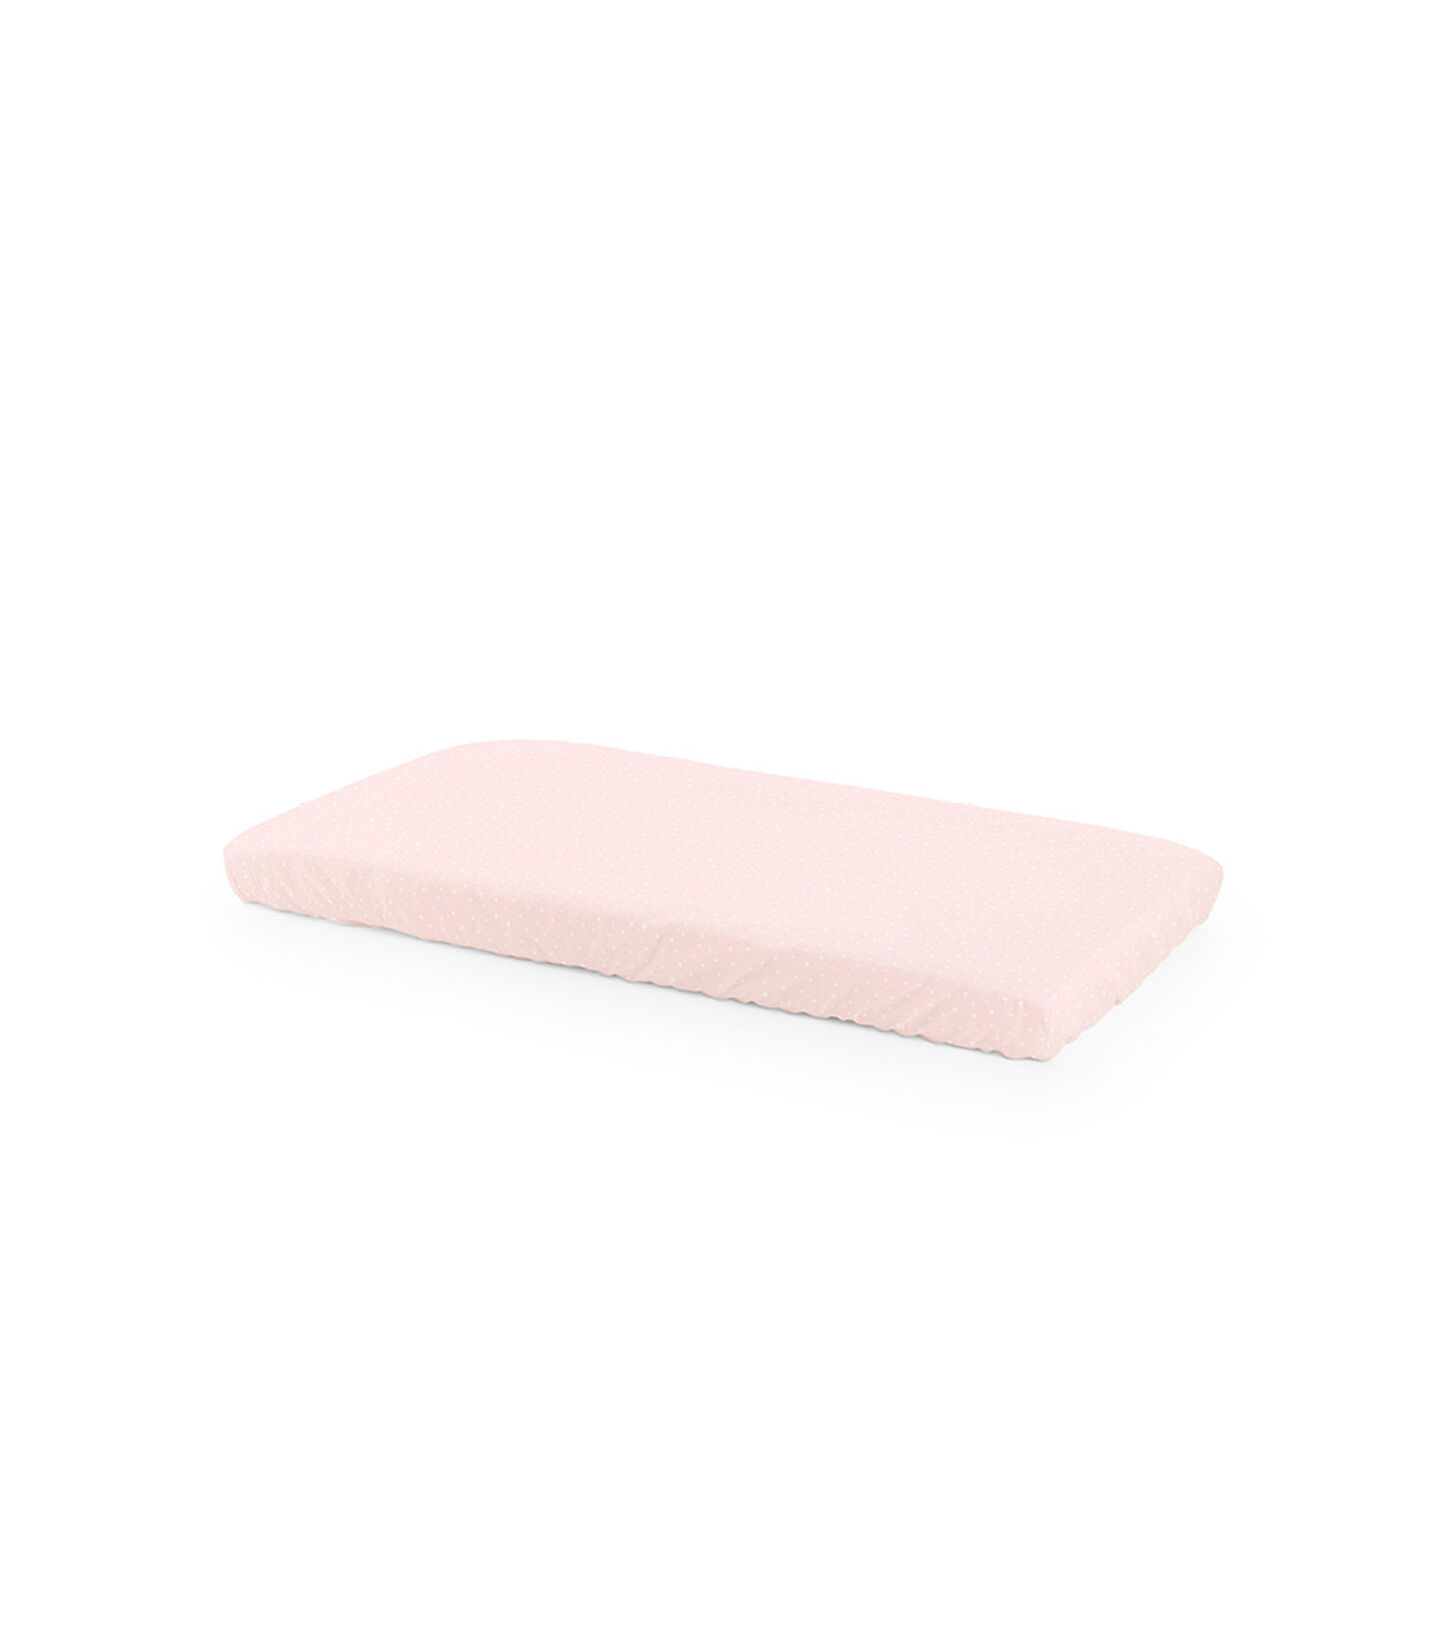 Stokke® Home™ Bed Fit Sheet Pink Bee, Pink Bee, mainview view 1